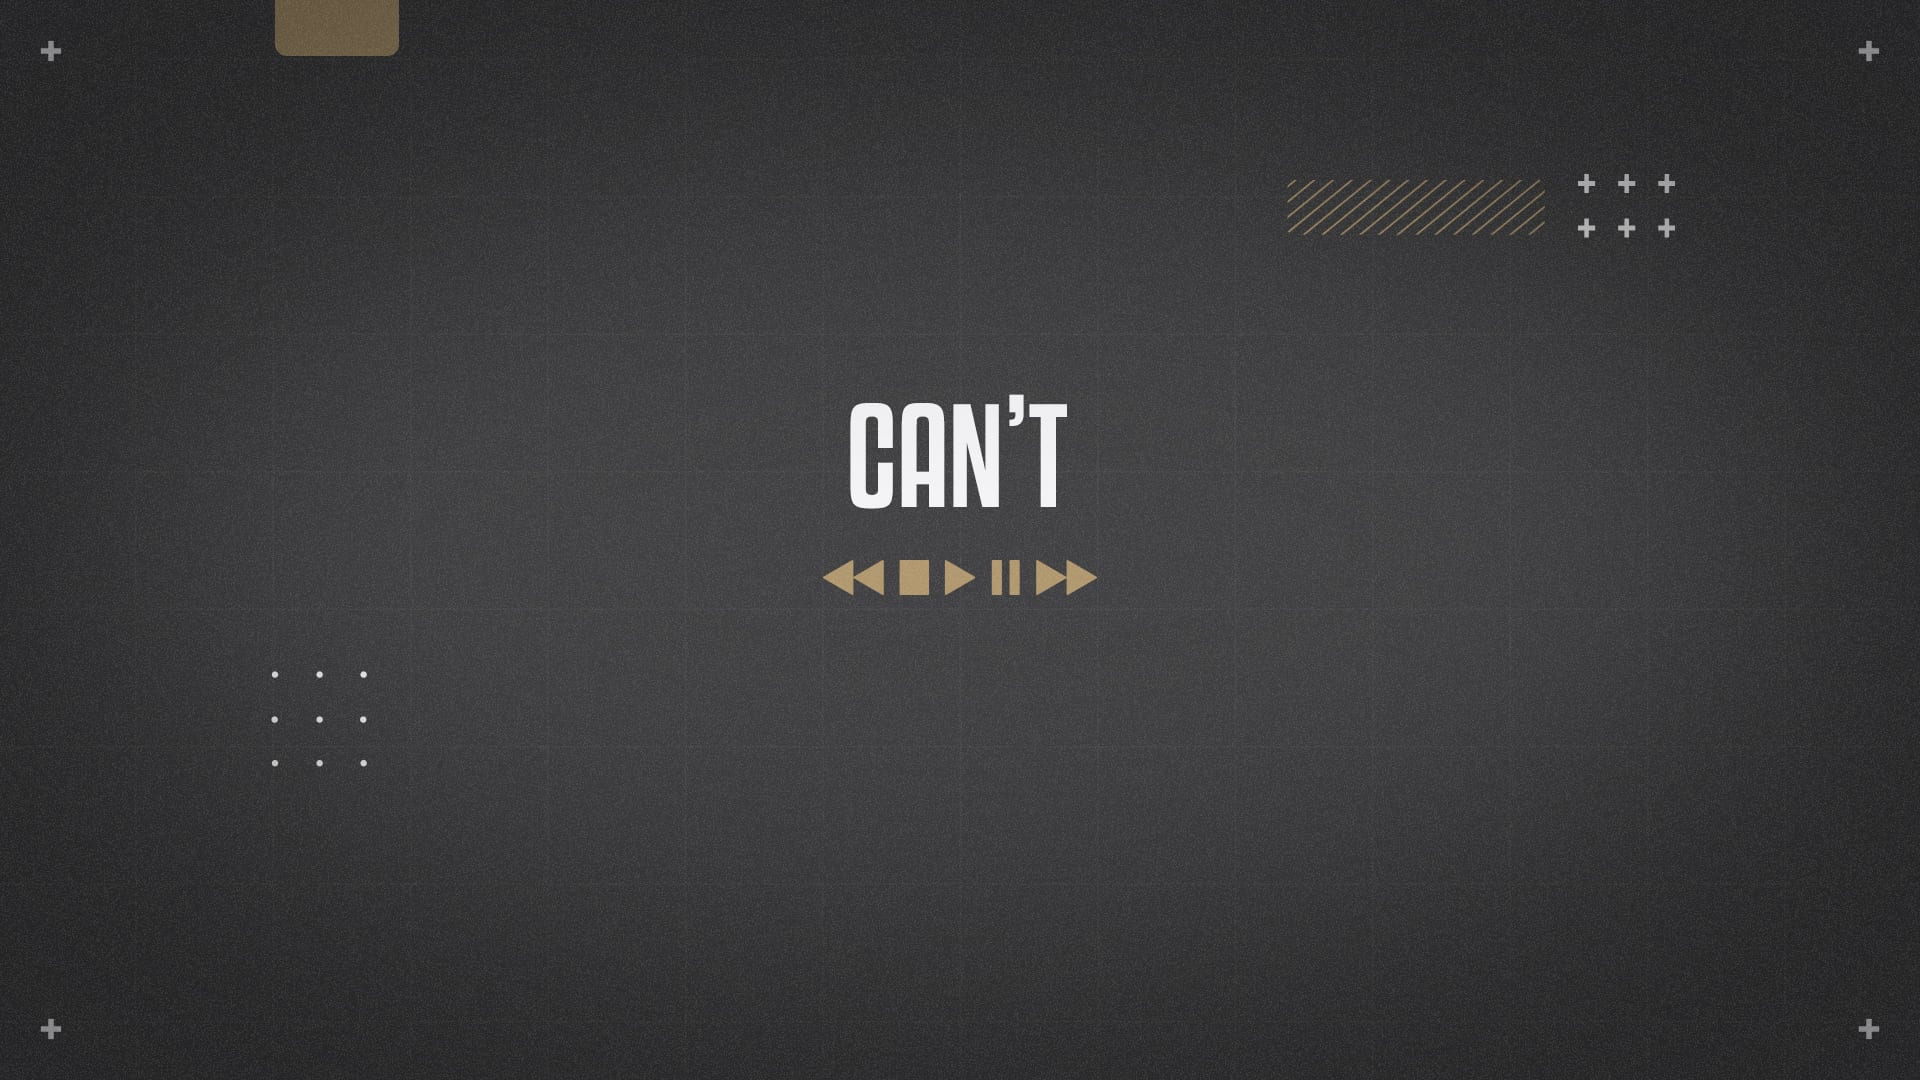 B09 – Just can’t